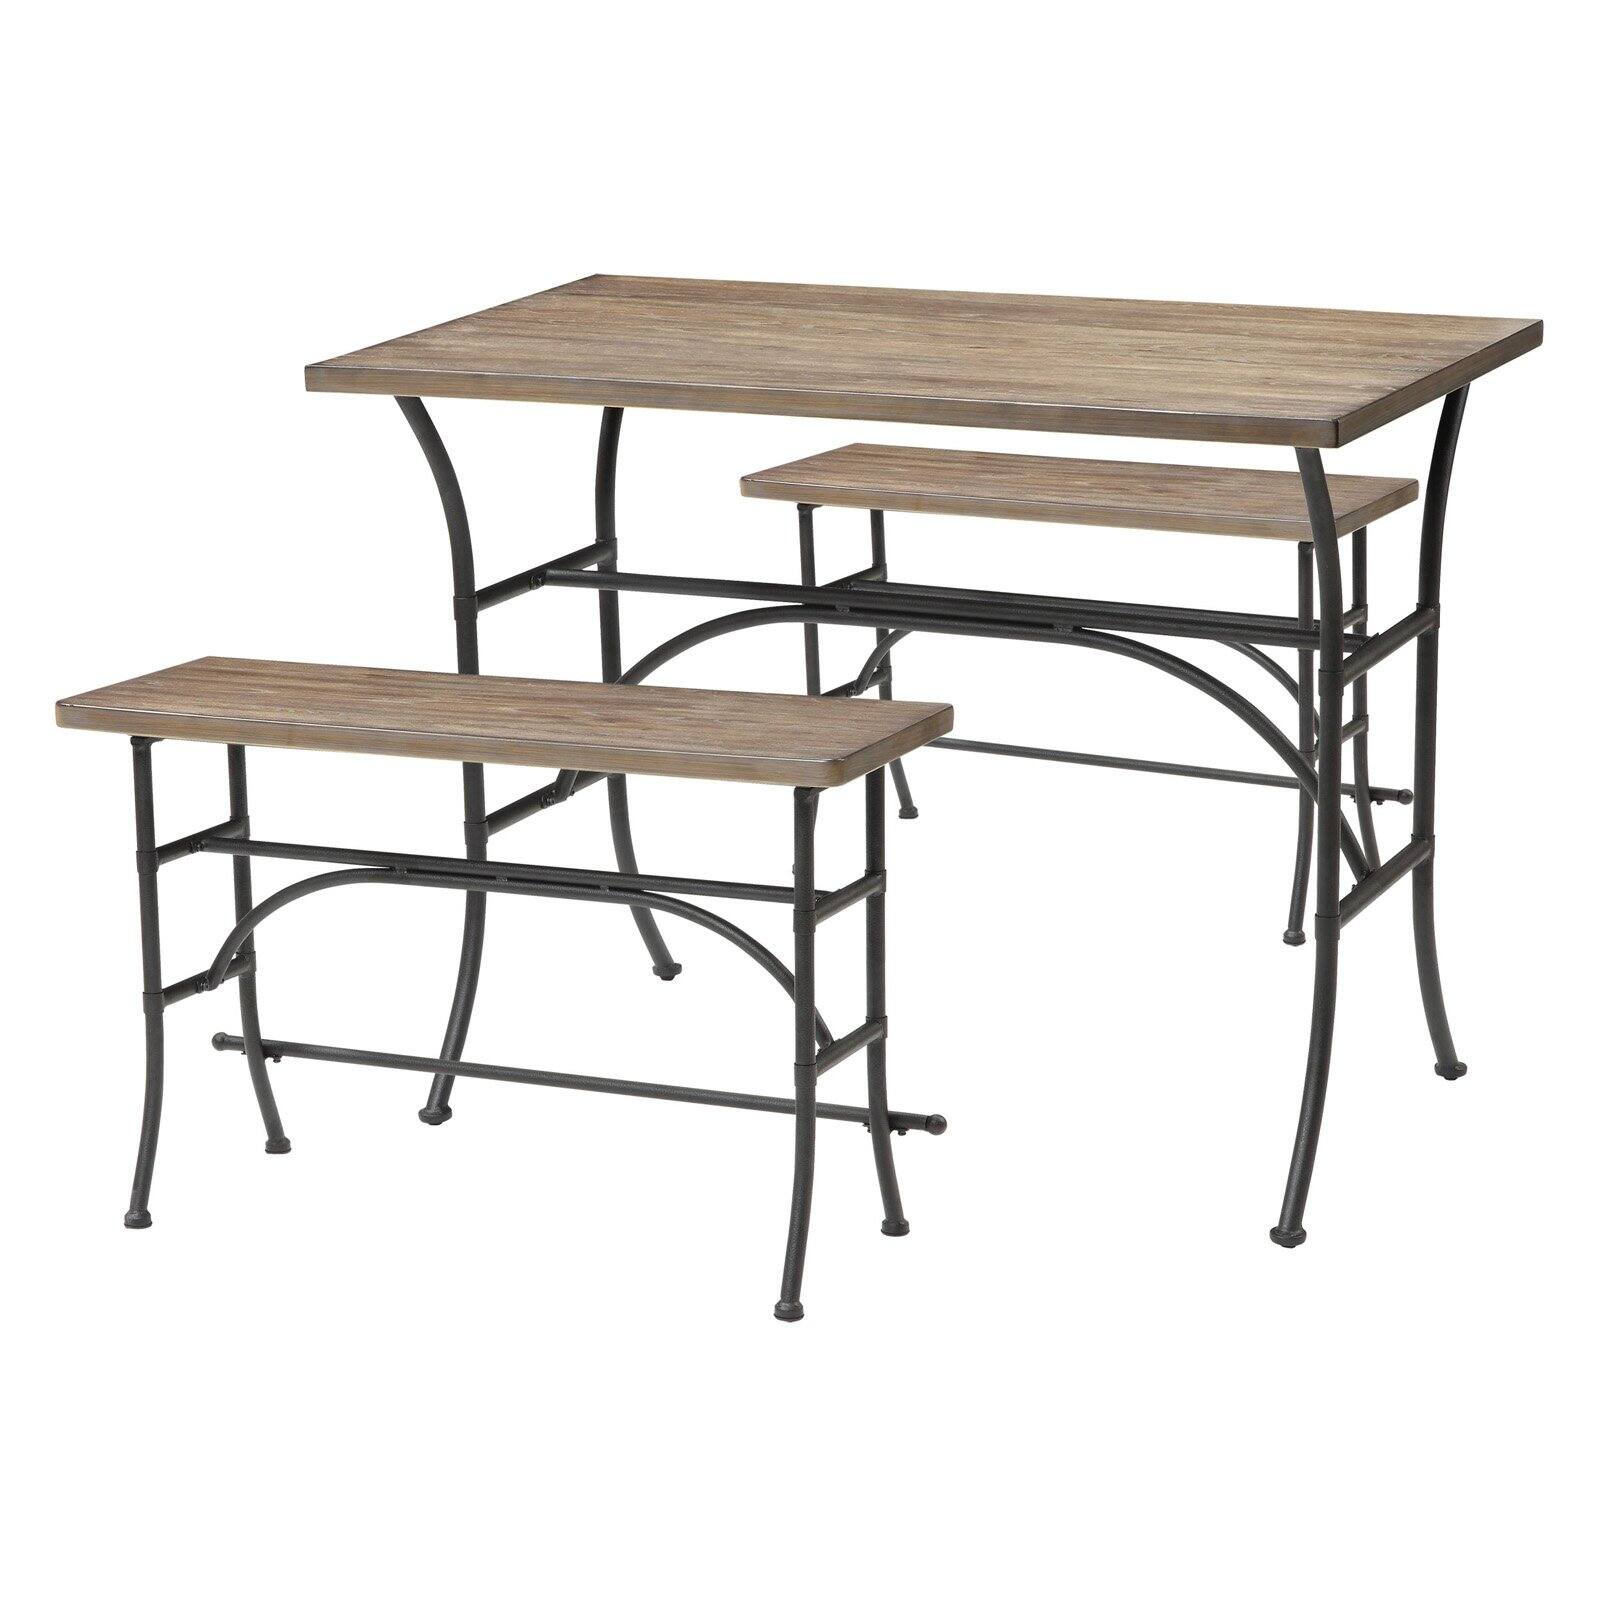 Domingo 3-Piece Counter-Height Dining Set, Oak and Antique Black - image 1 of 2